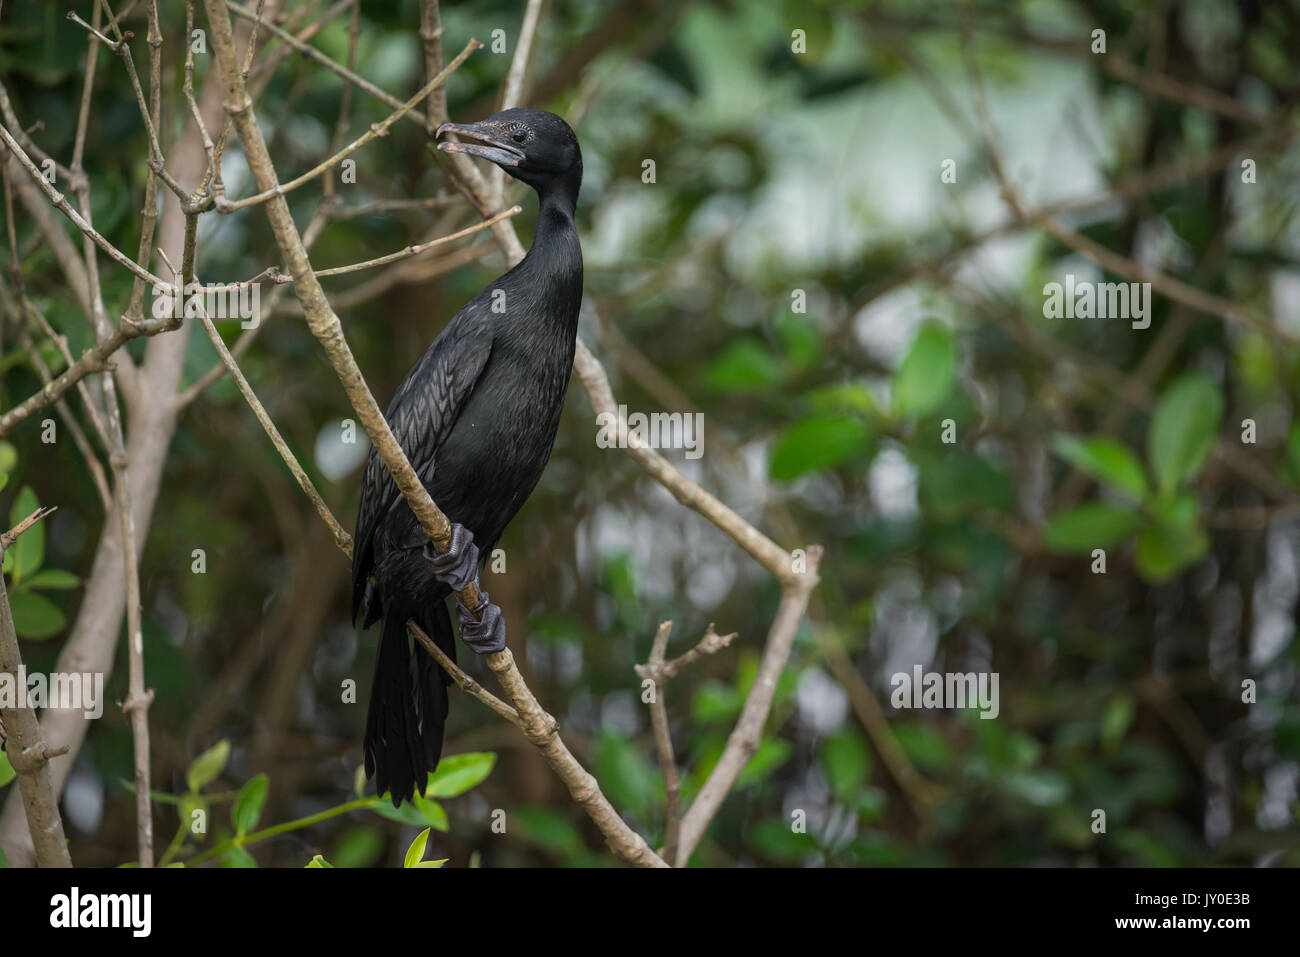 A close-up shot of a little cormorant perched on a tree Stock Photo